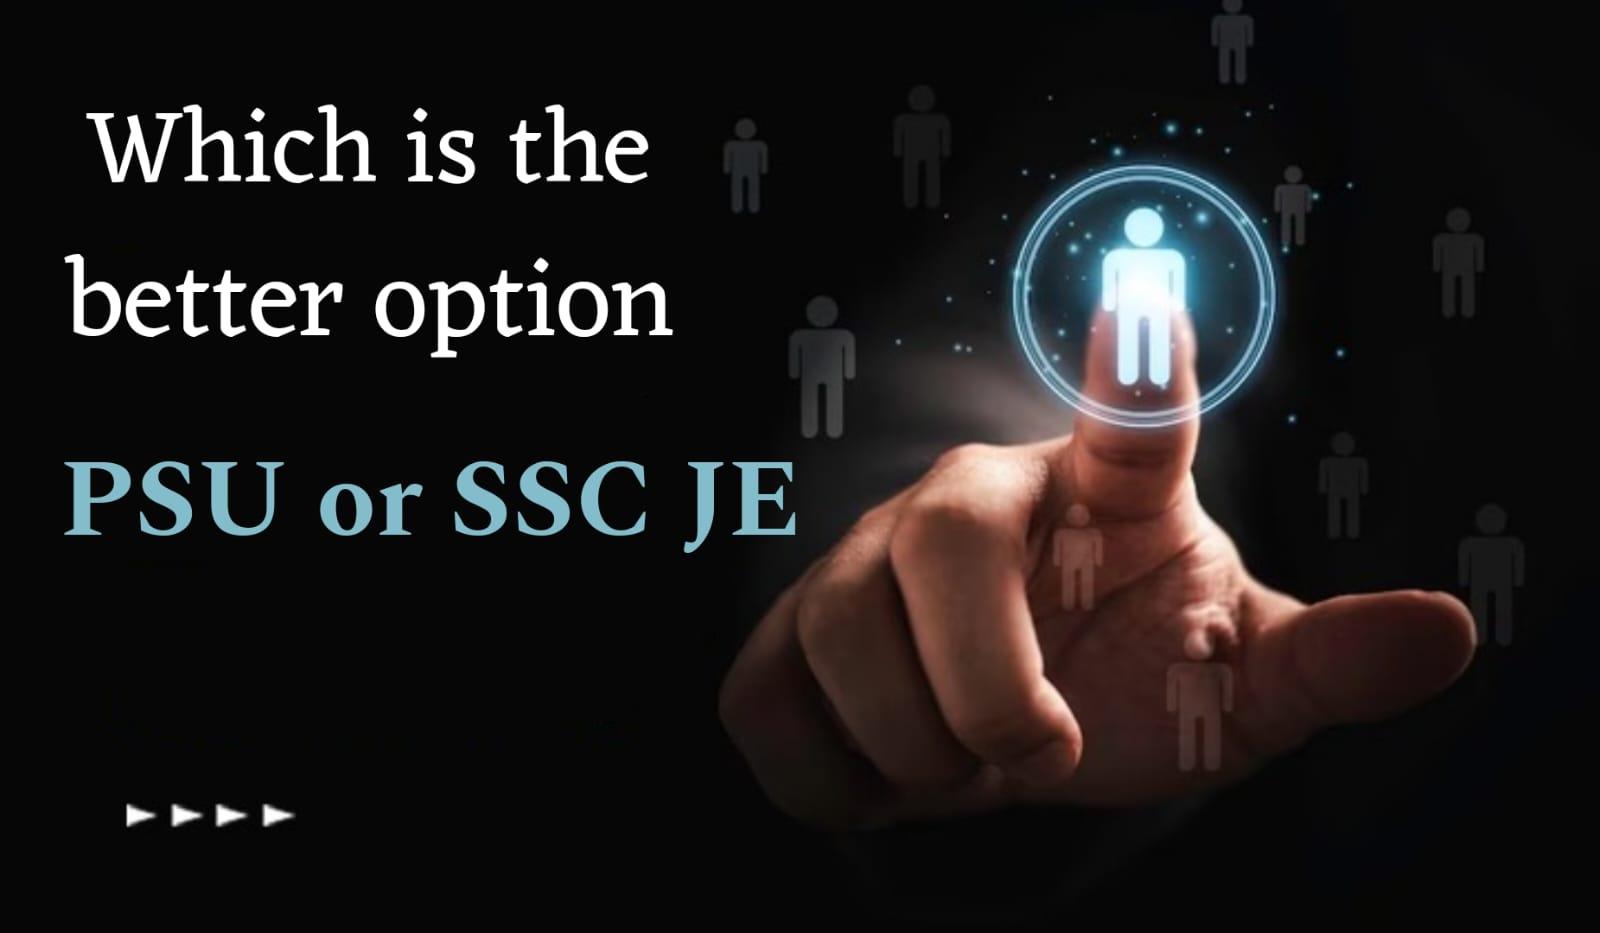 Which is the better option - PSU or SSC JE?